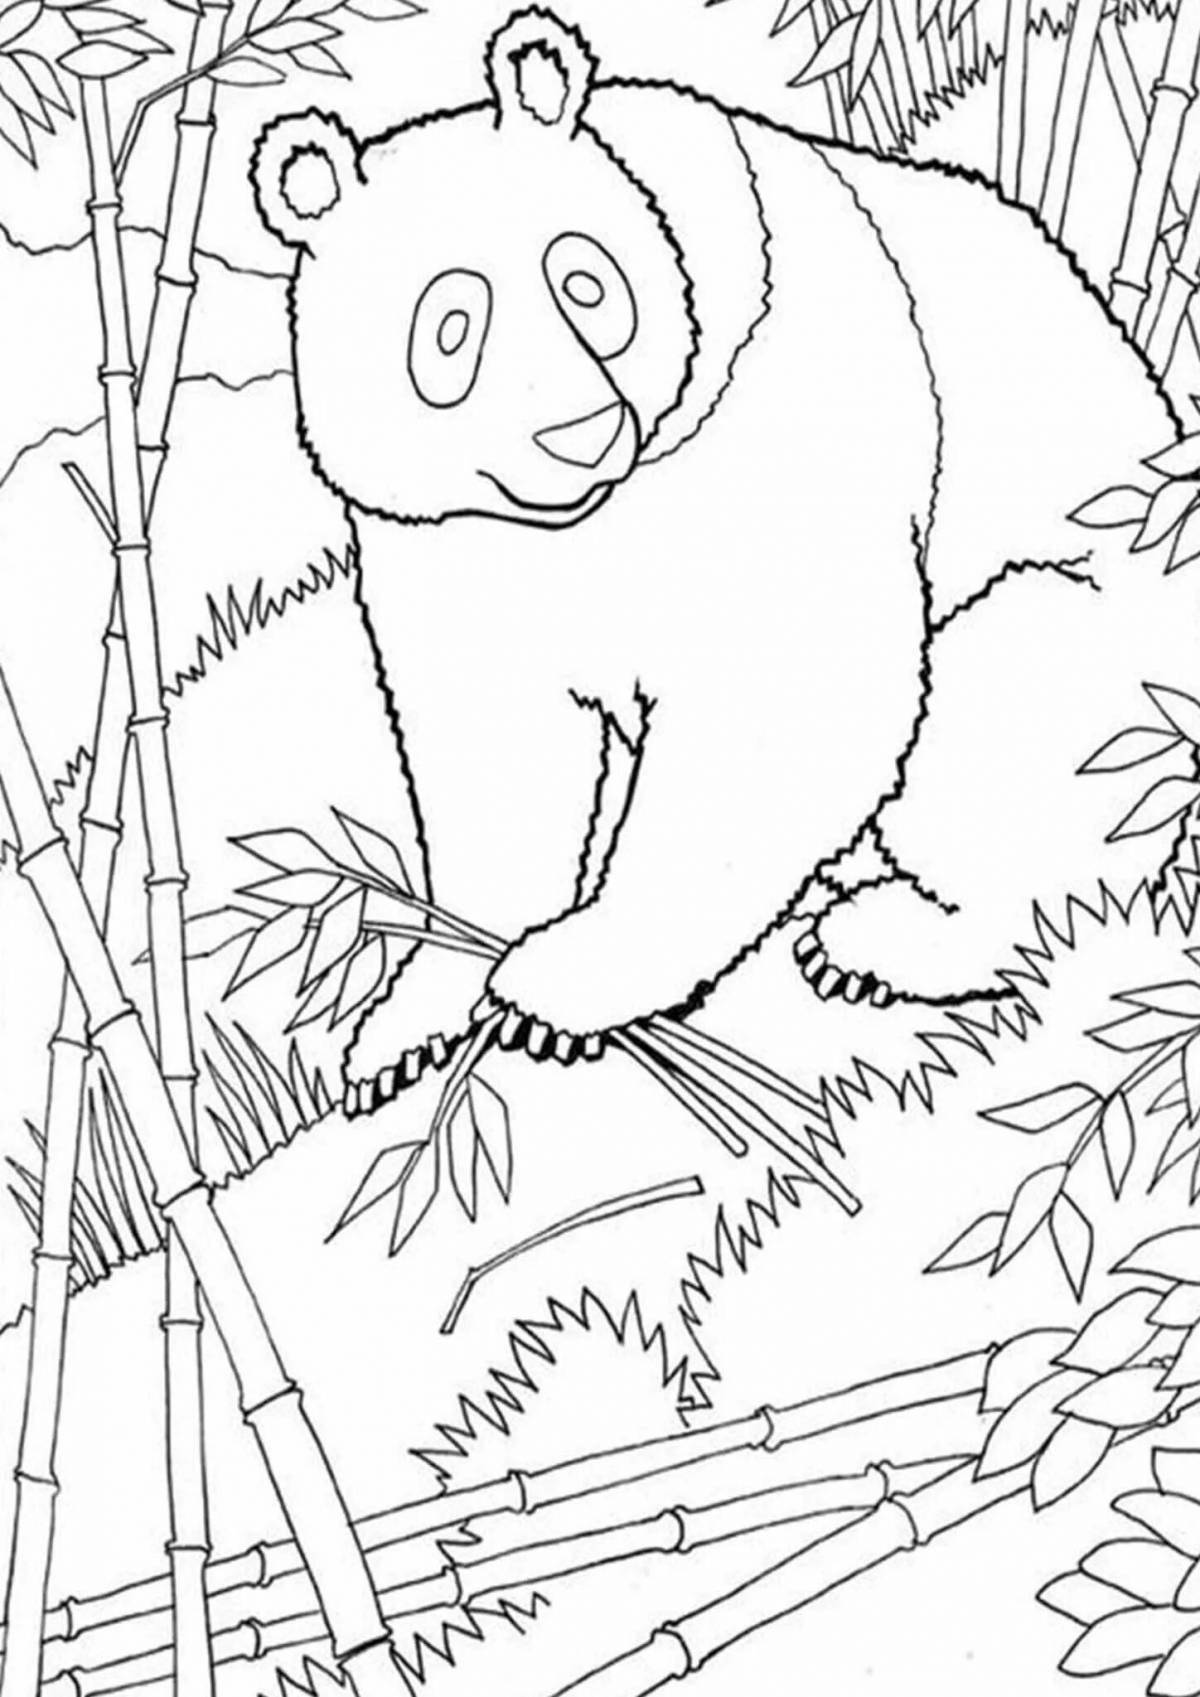 Exciting coloring panda with bamboo